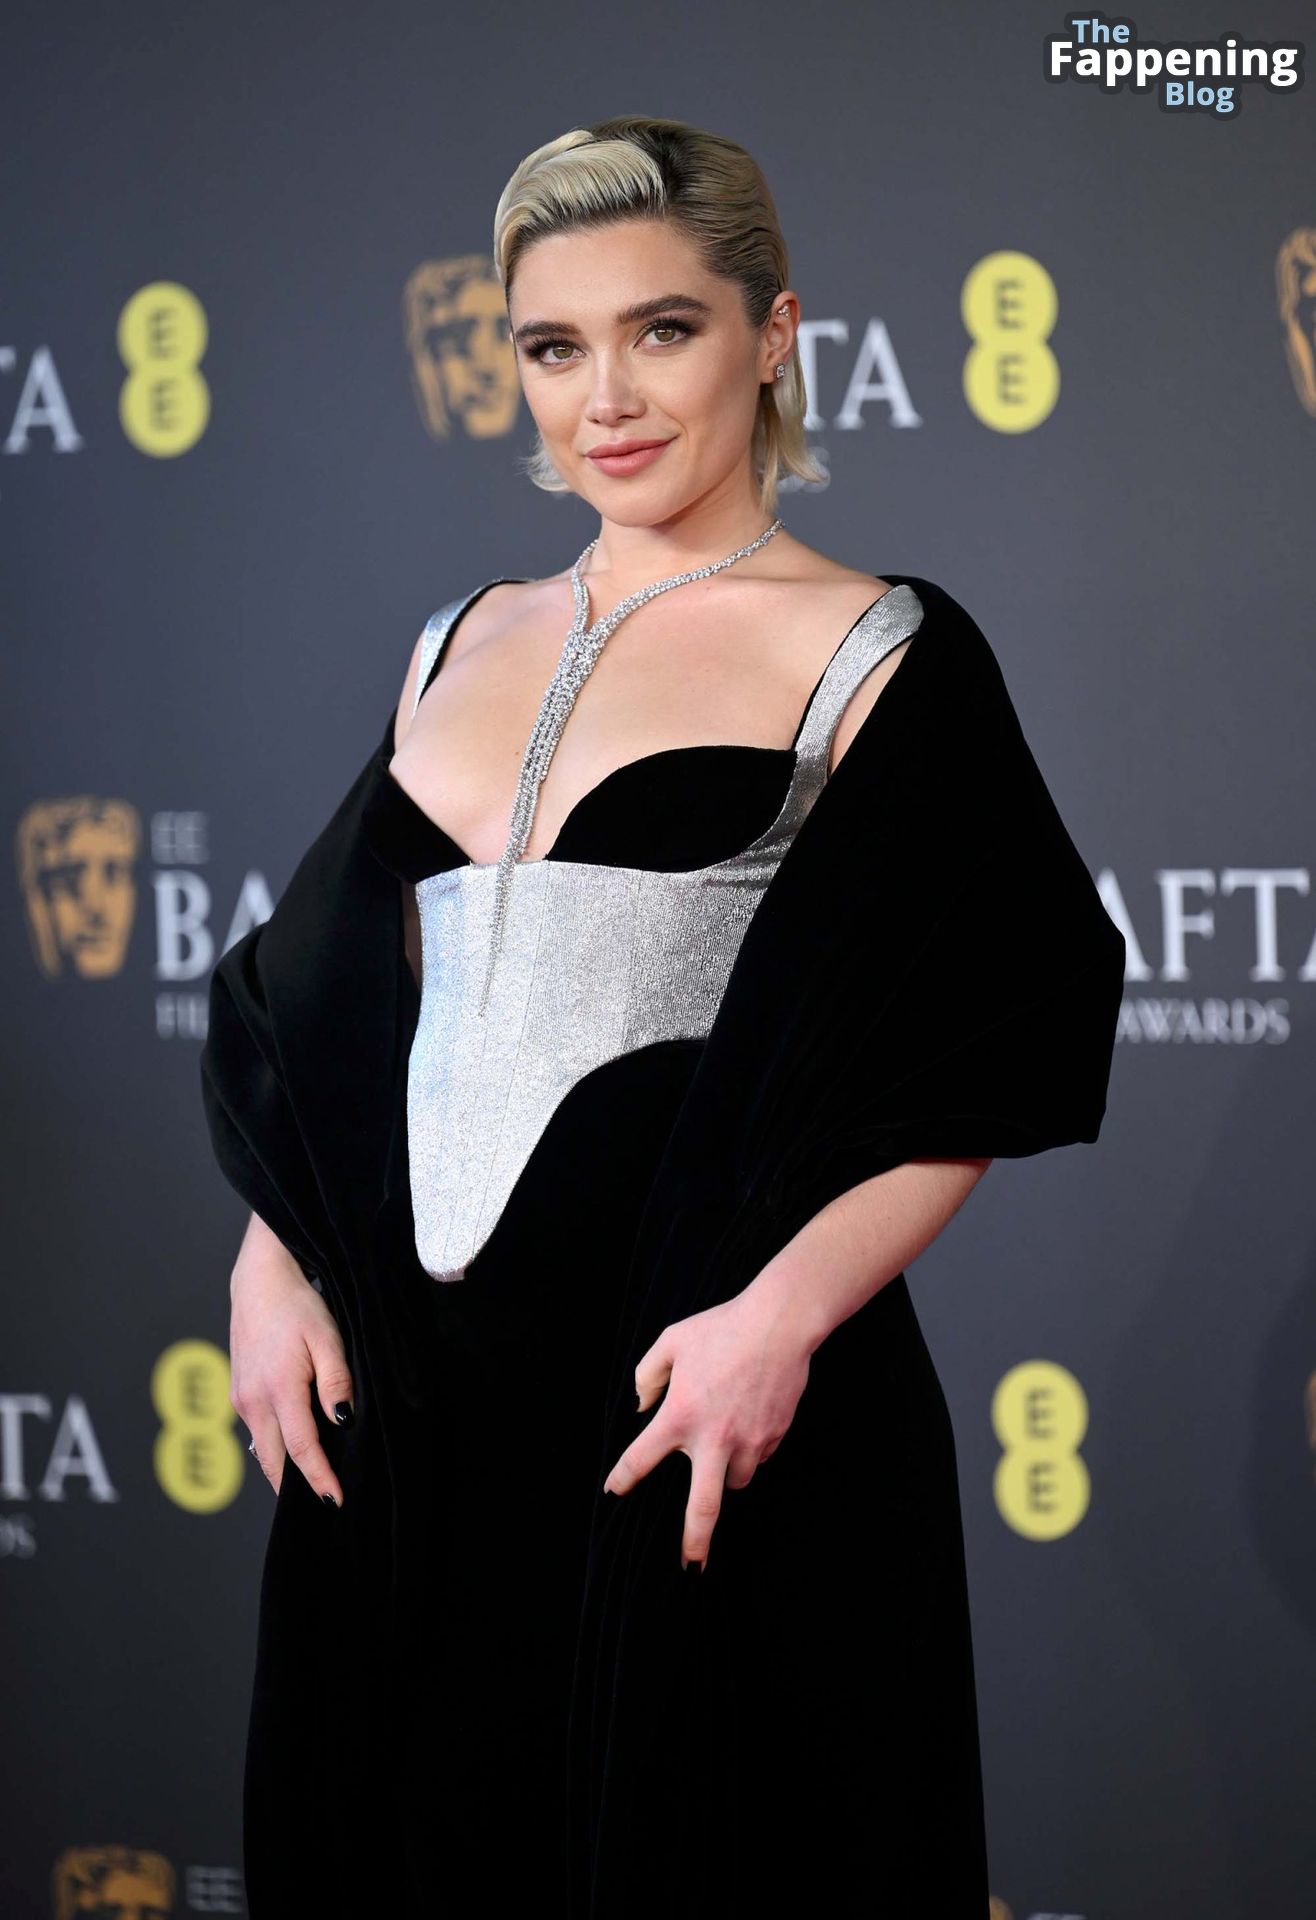 Florence-Pugh-Sexy-11-The-Fappening-Blog-2.jpg